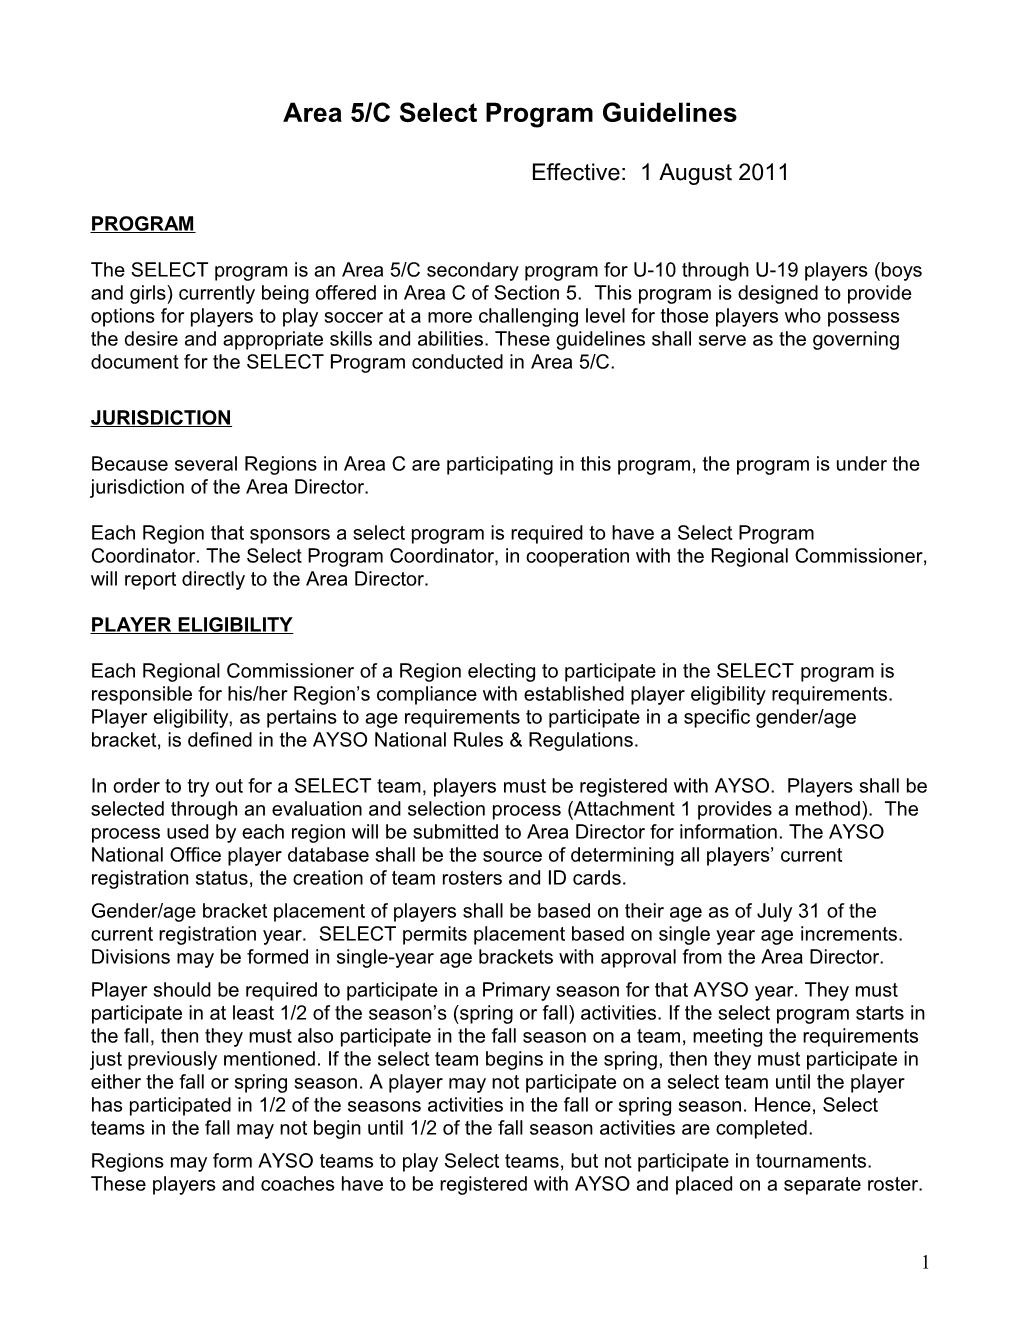 Ayso Plus Guidelines Fall 2004